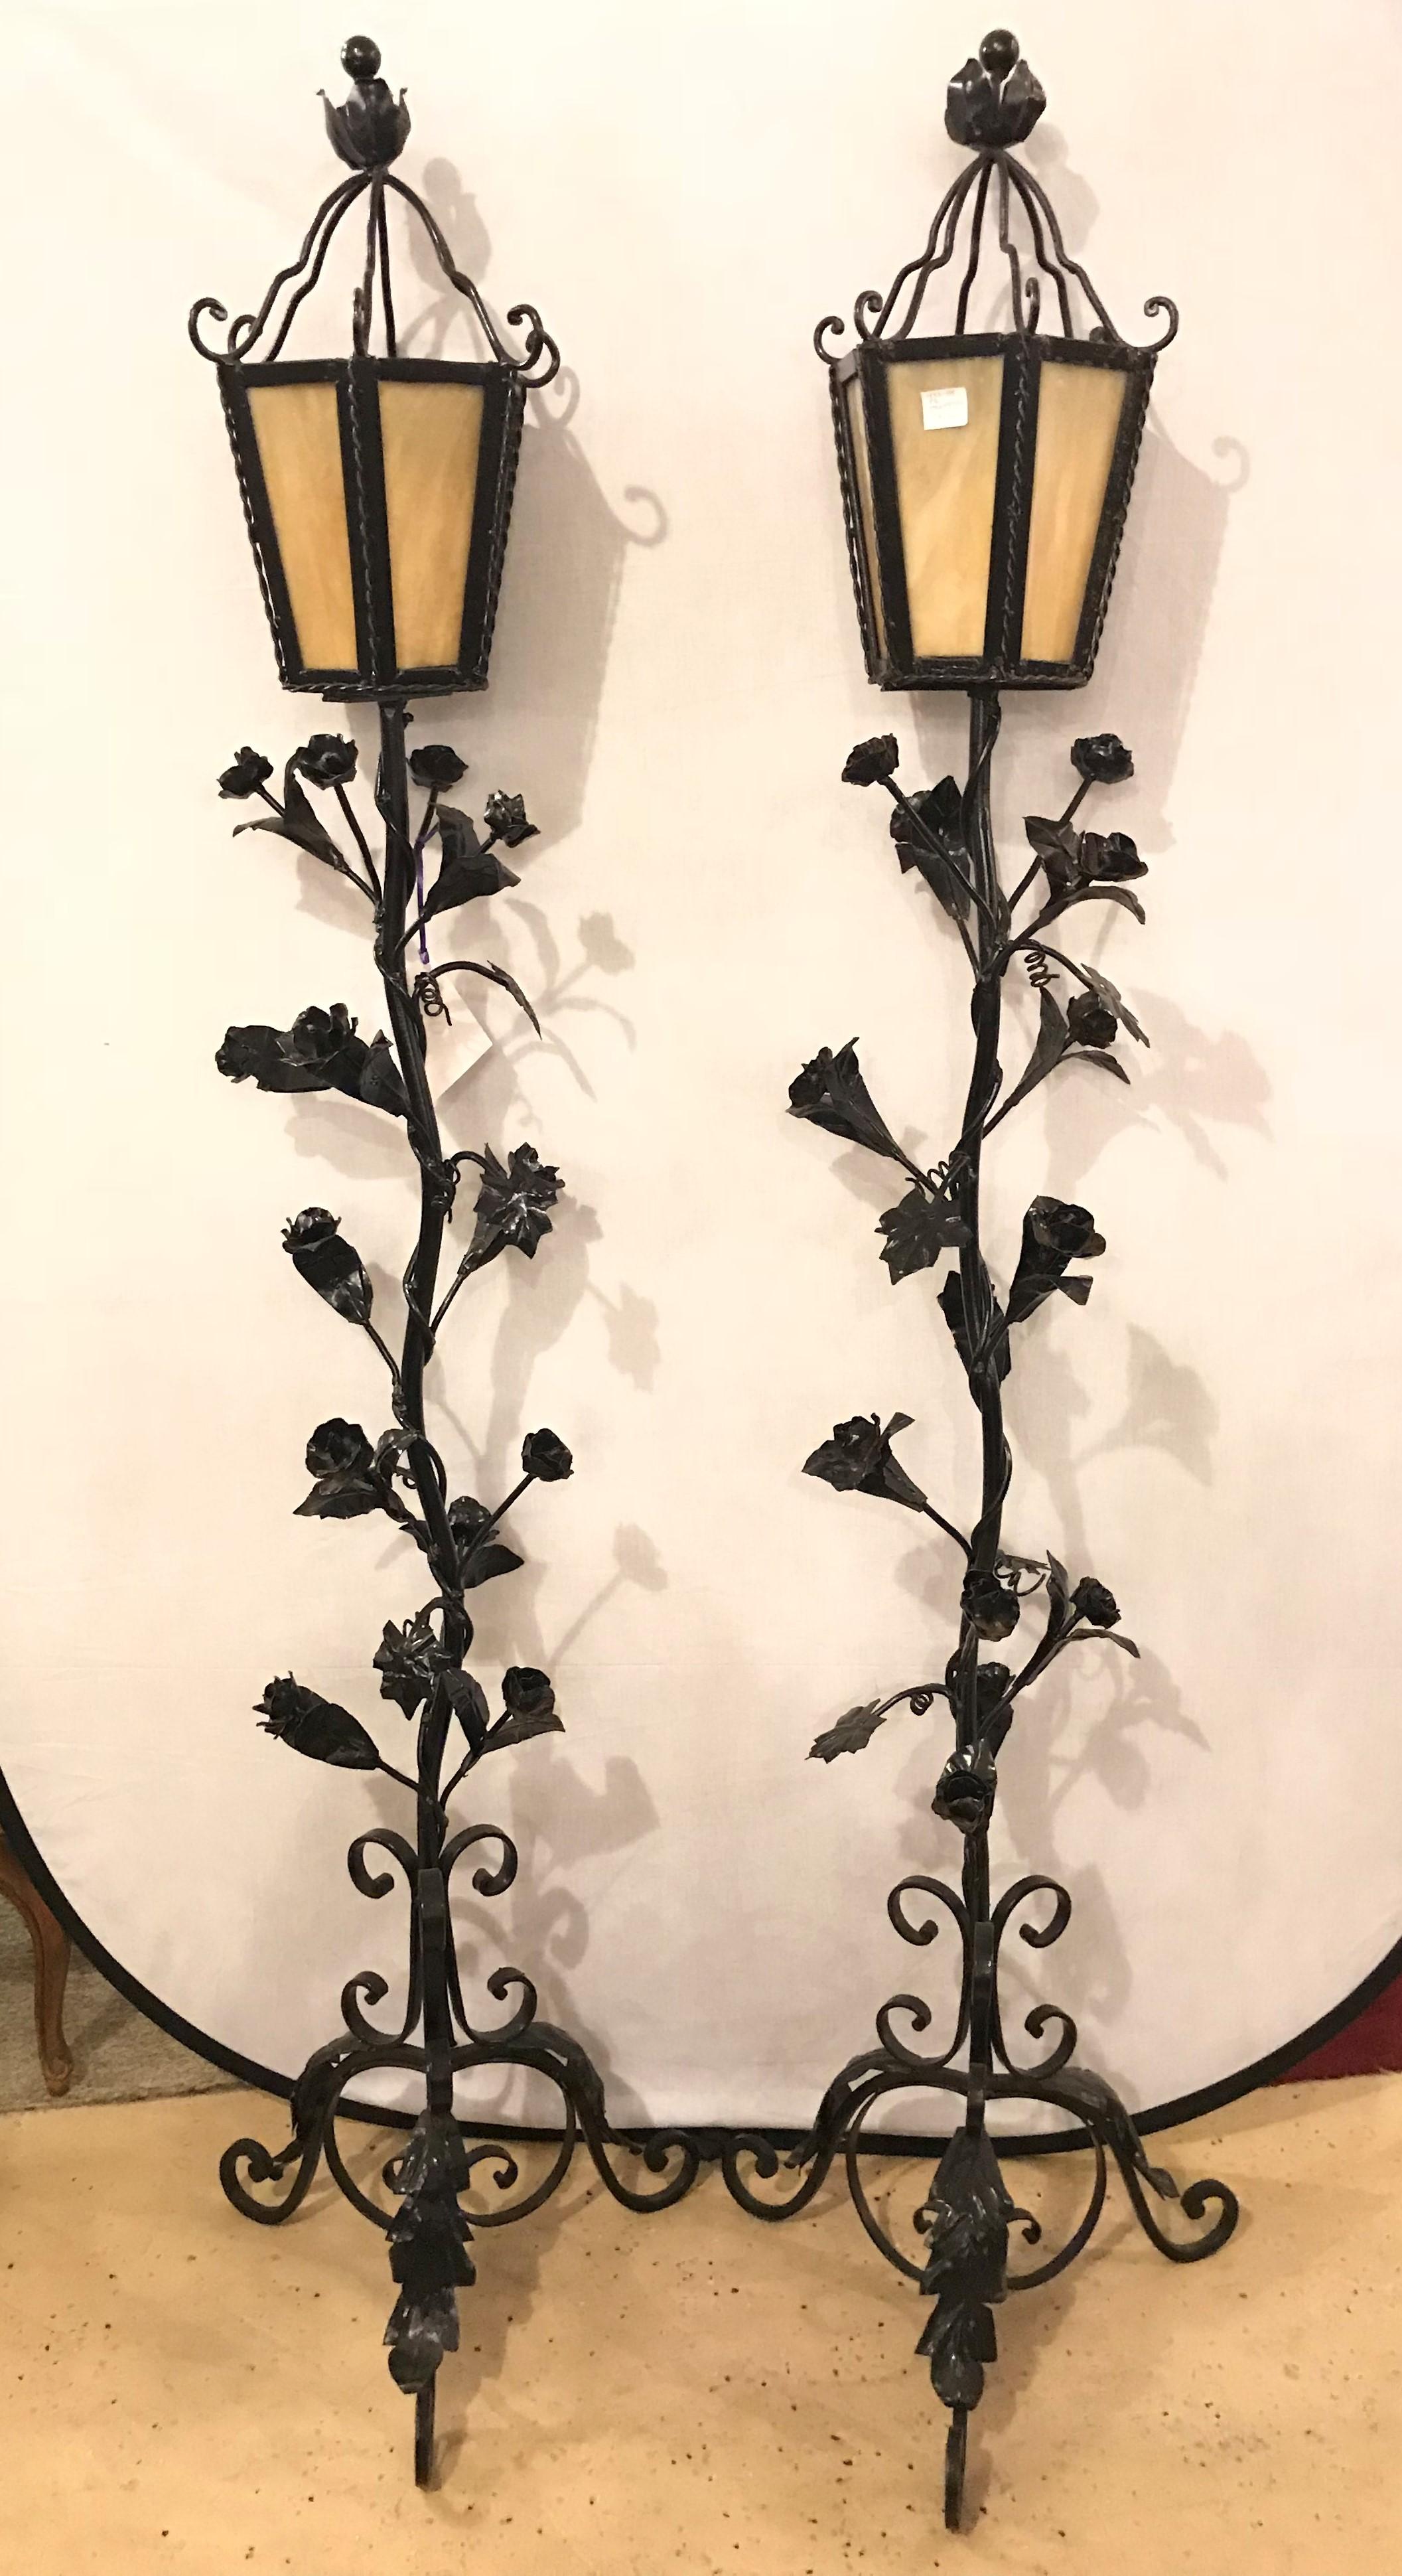 A pair of black late 19th or early 20th century painted art glass lidded torchieres with leaves and roses. These fine iron standing lanterns each have a wonderfully decorative ebony frame with flowing leaf, vine and rosettes on the stem leading to